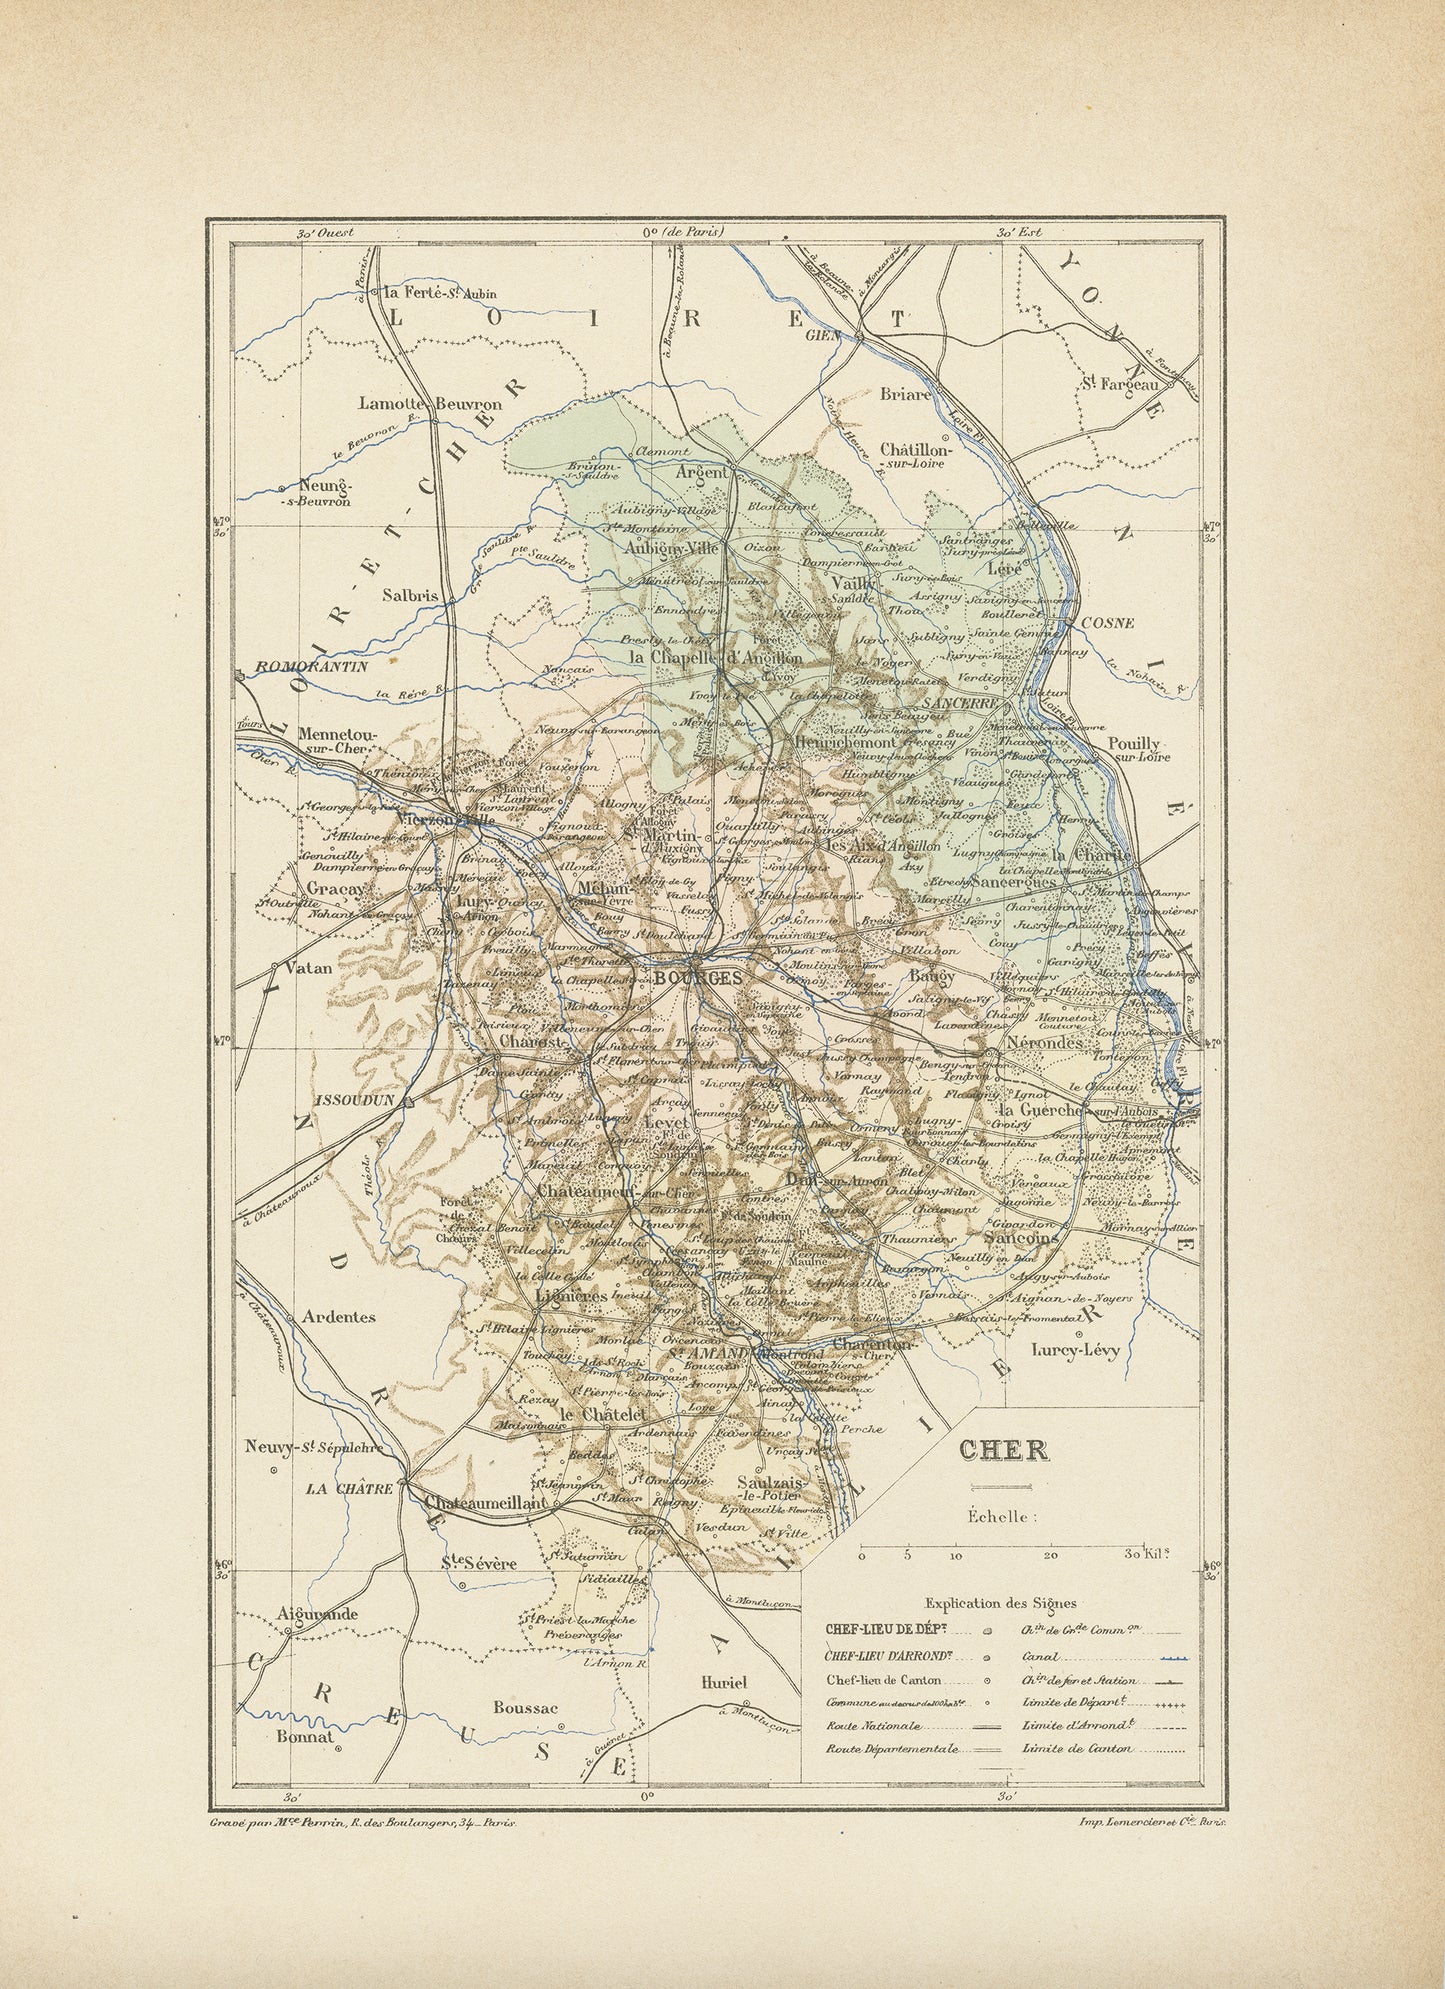 1892 Cher Map - France